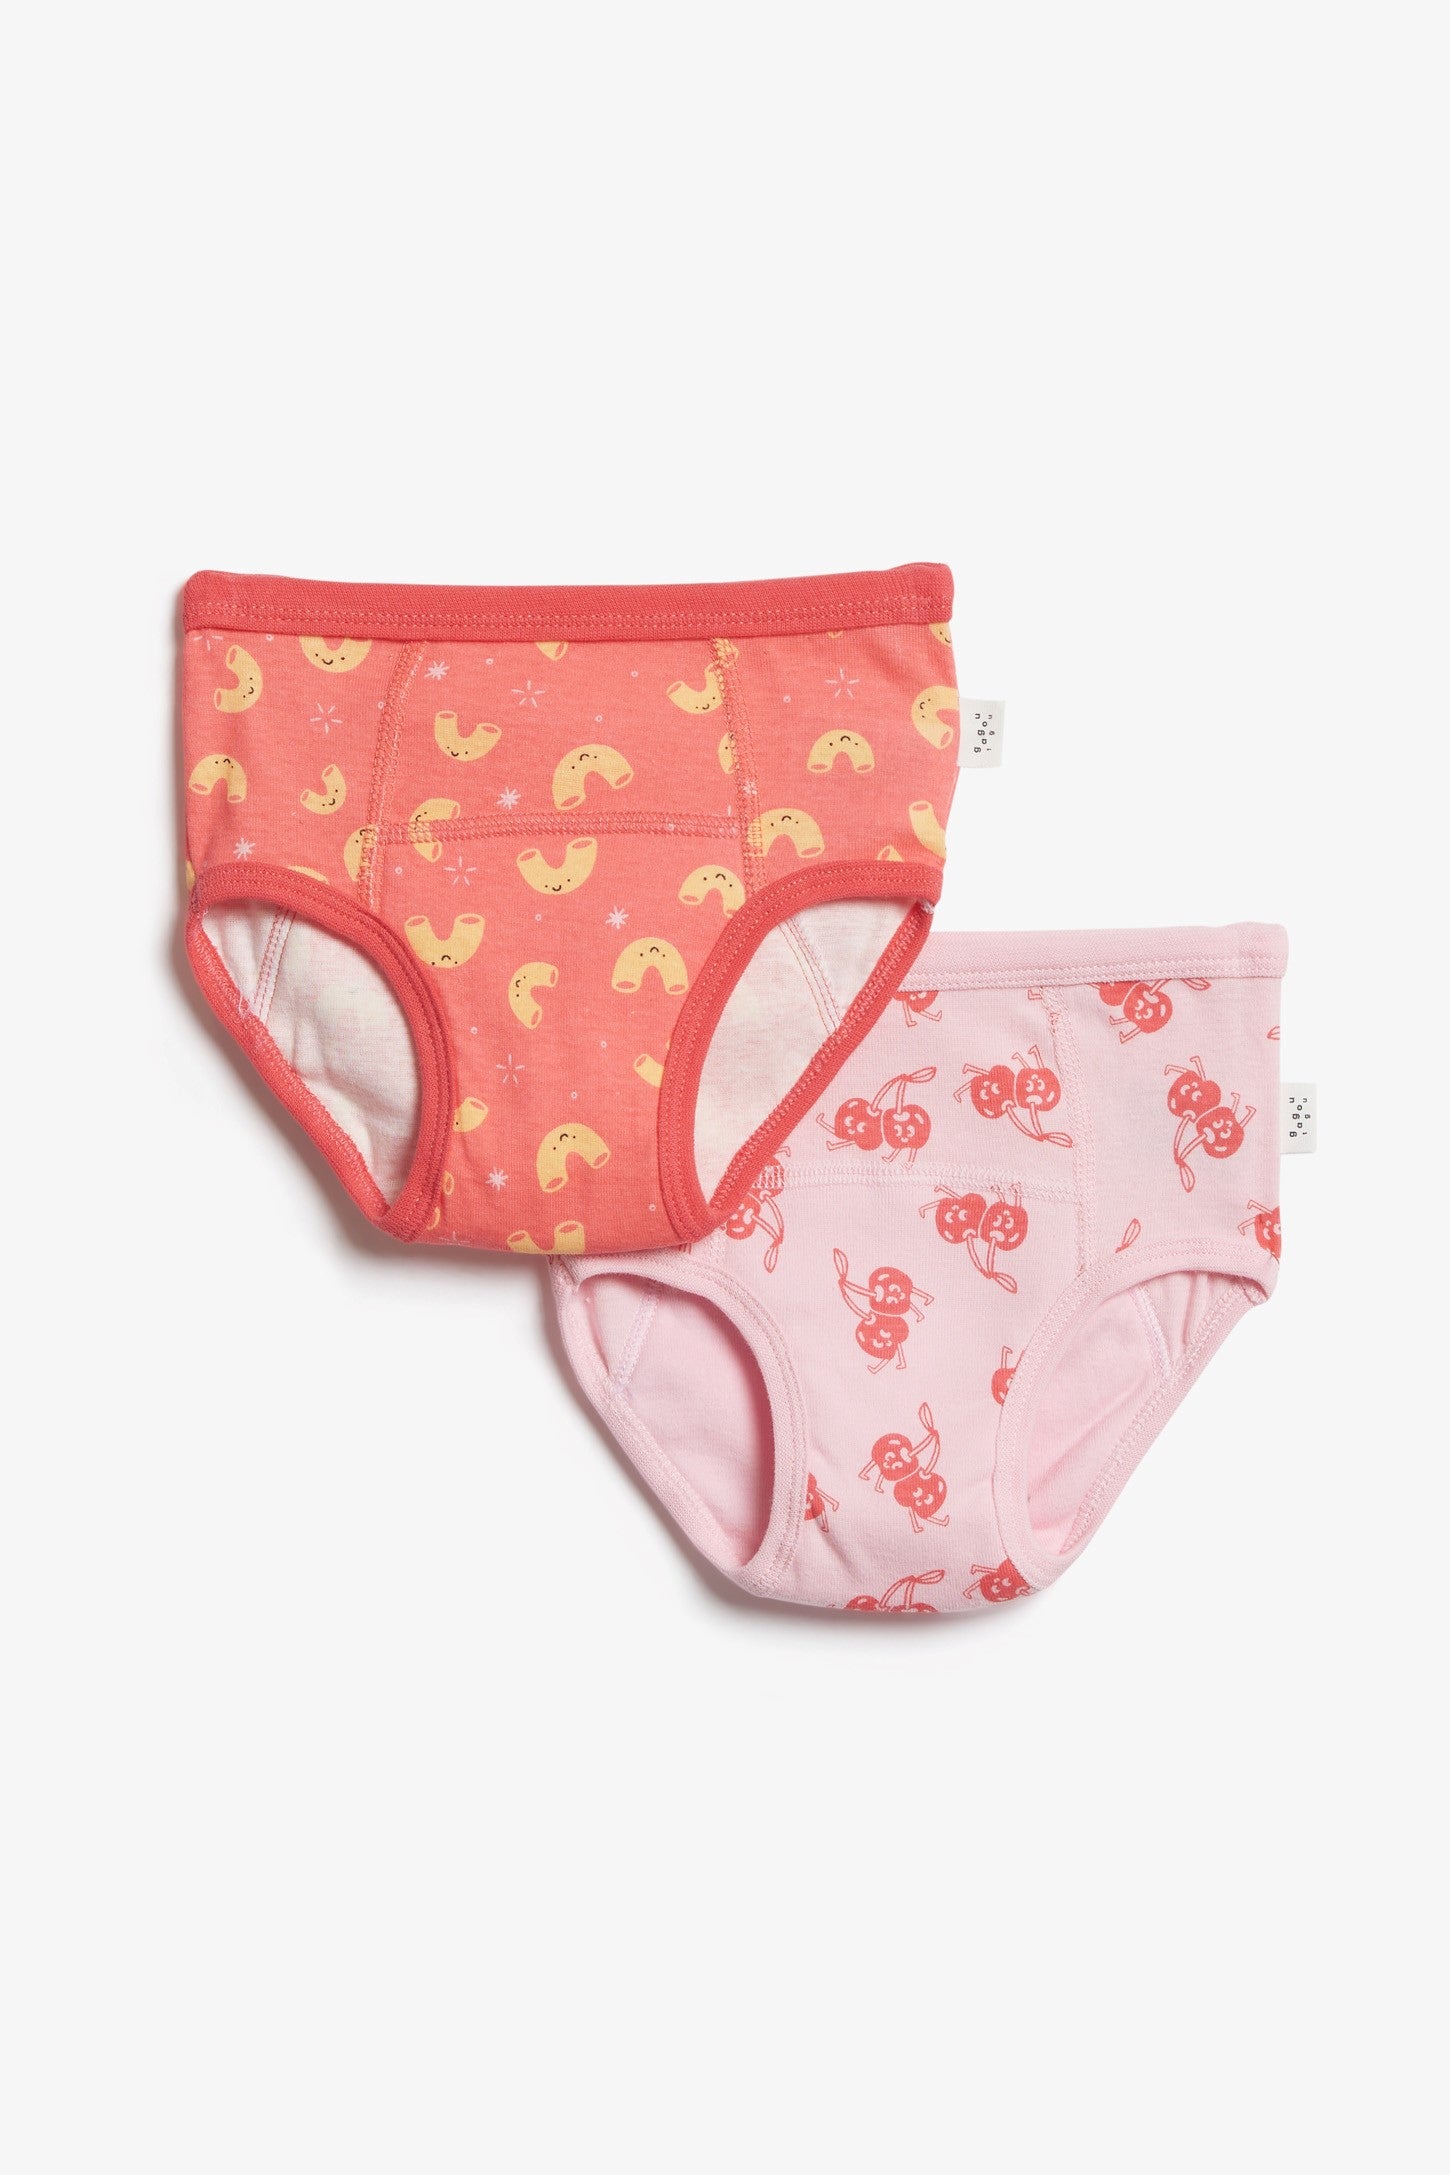 Little Fairy Lace Underwear packs – YouthBaee